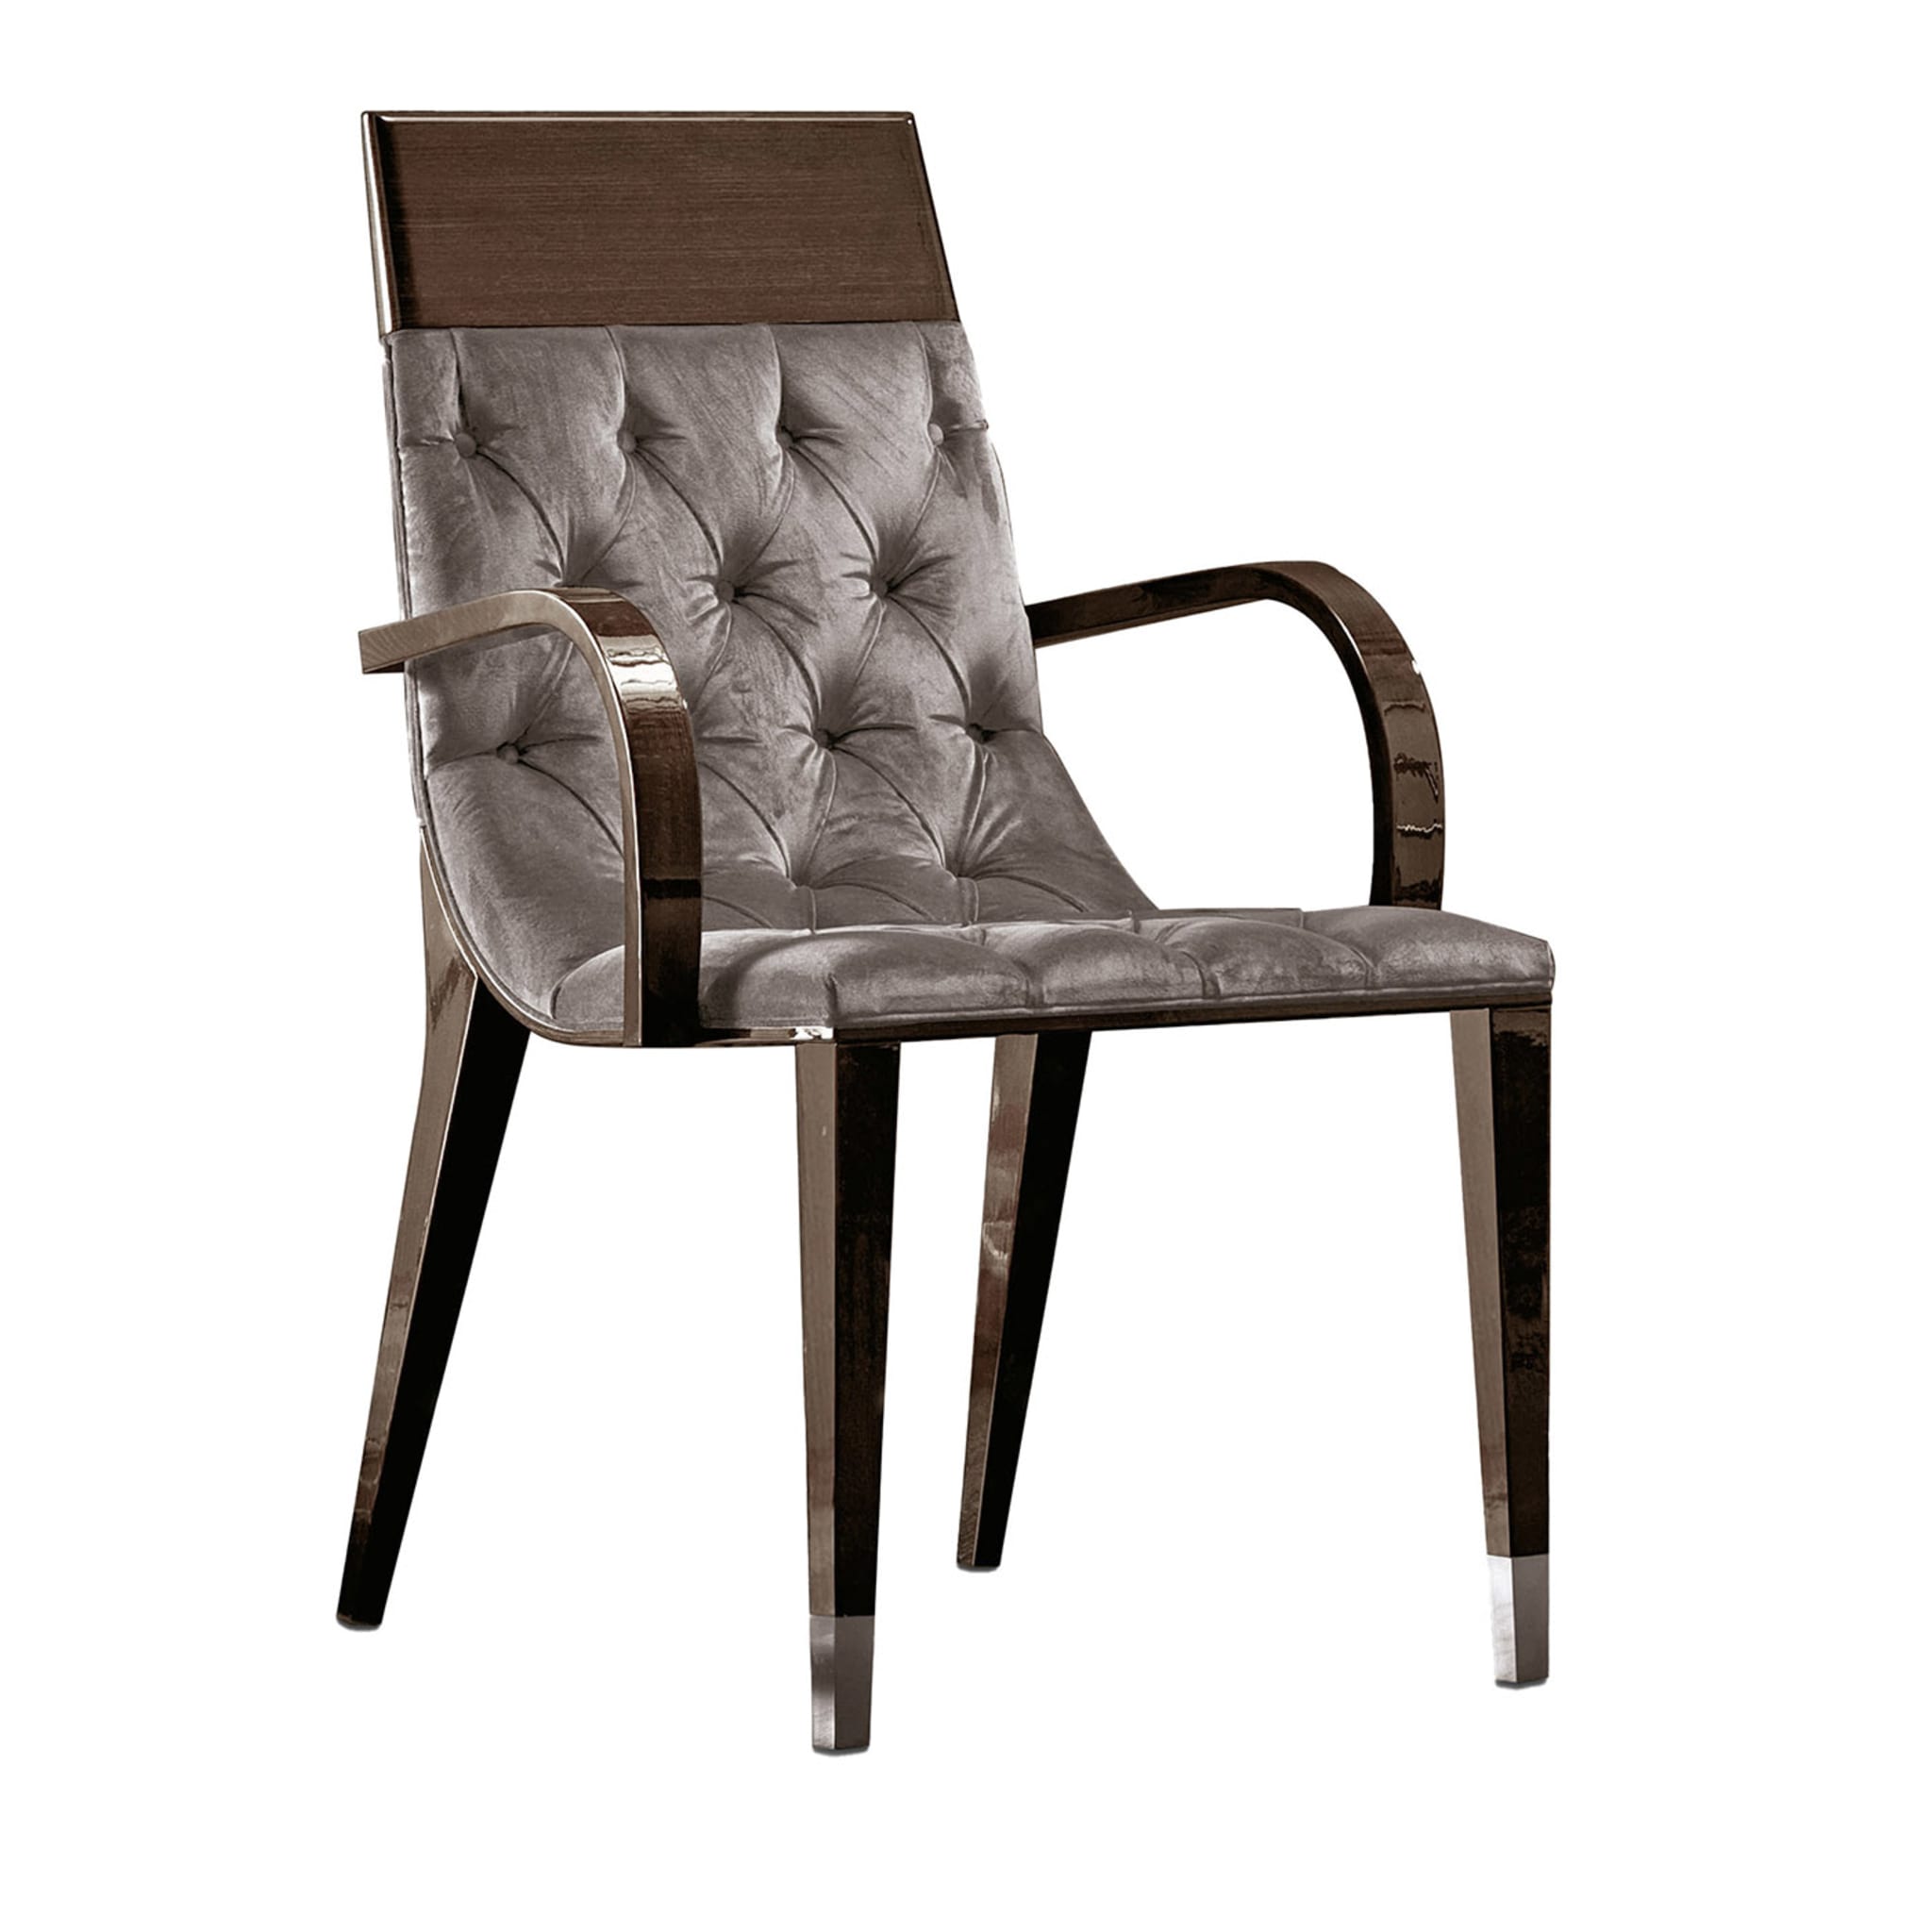 Absolute Tufted Gray & Brown fabric Chair with Armrests - Main view